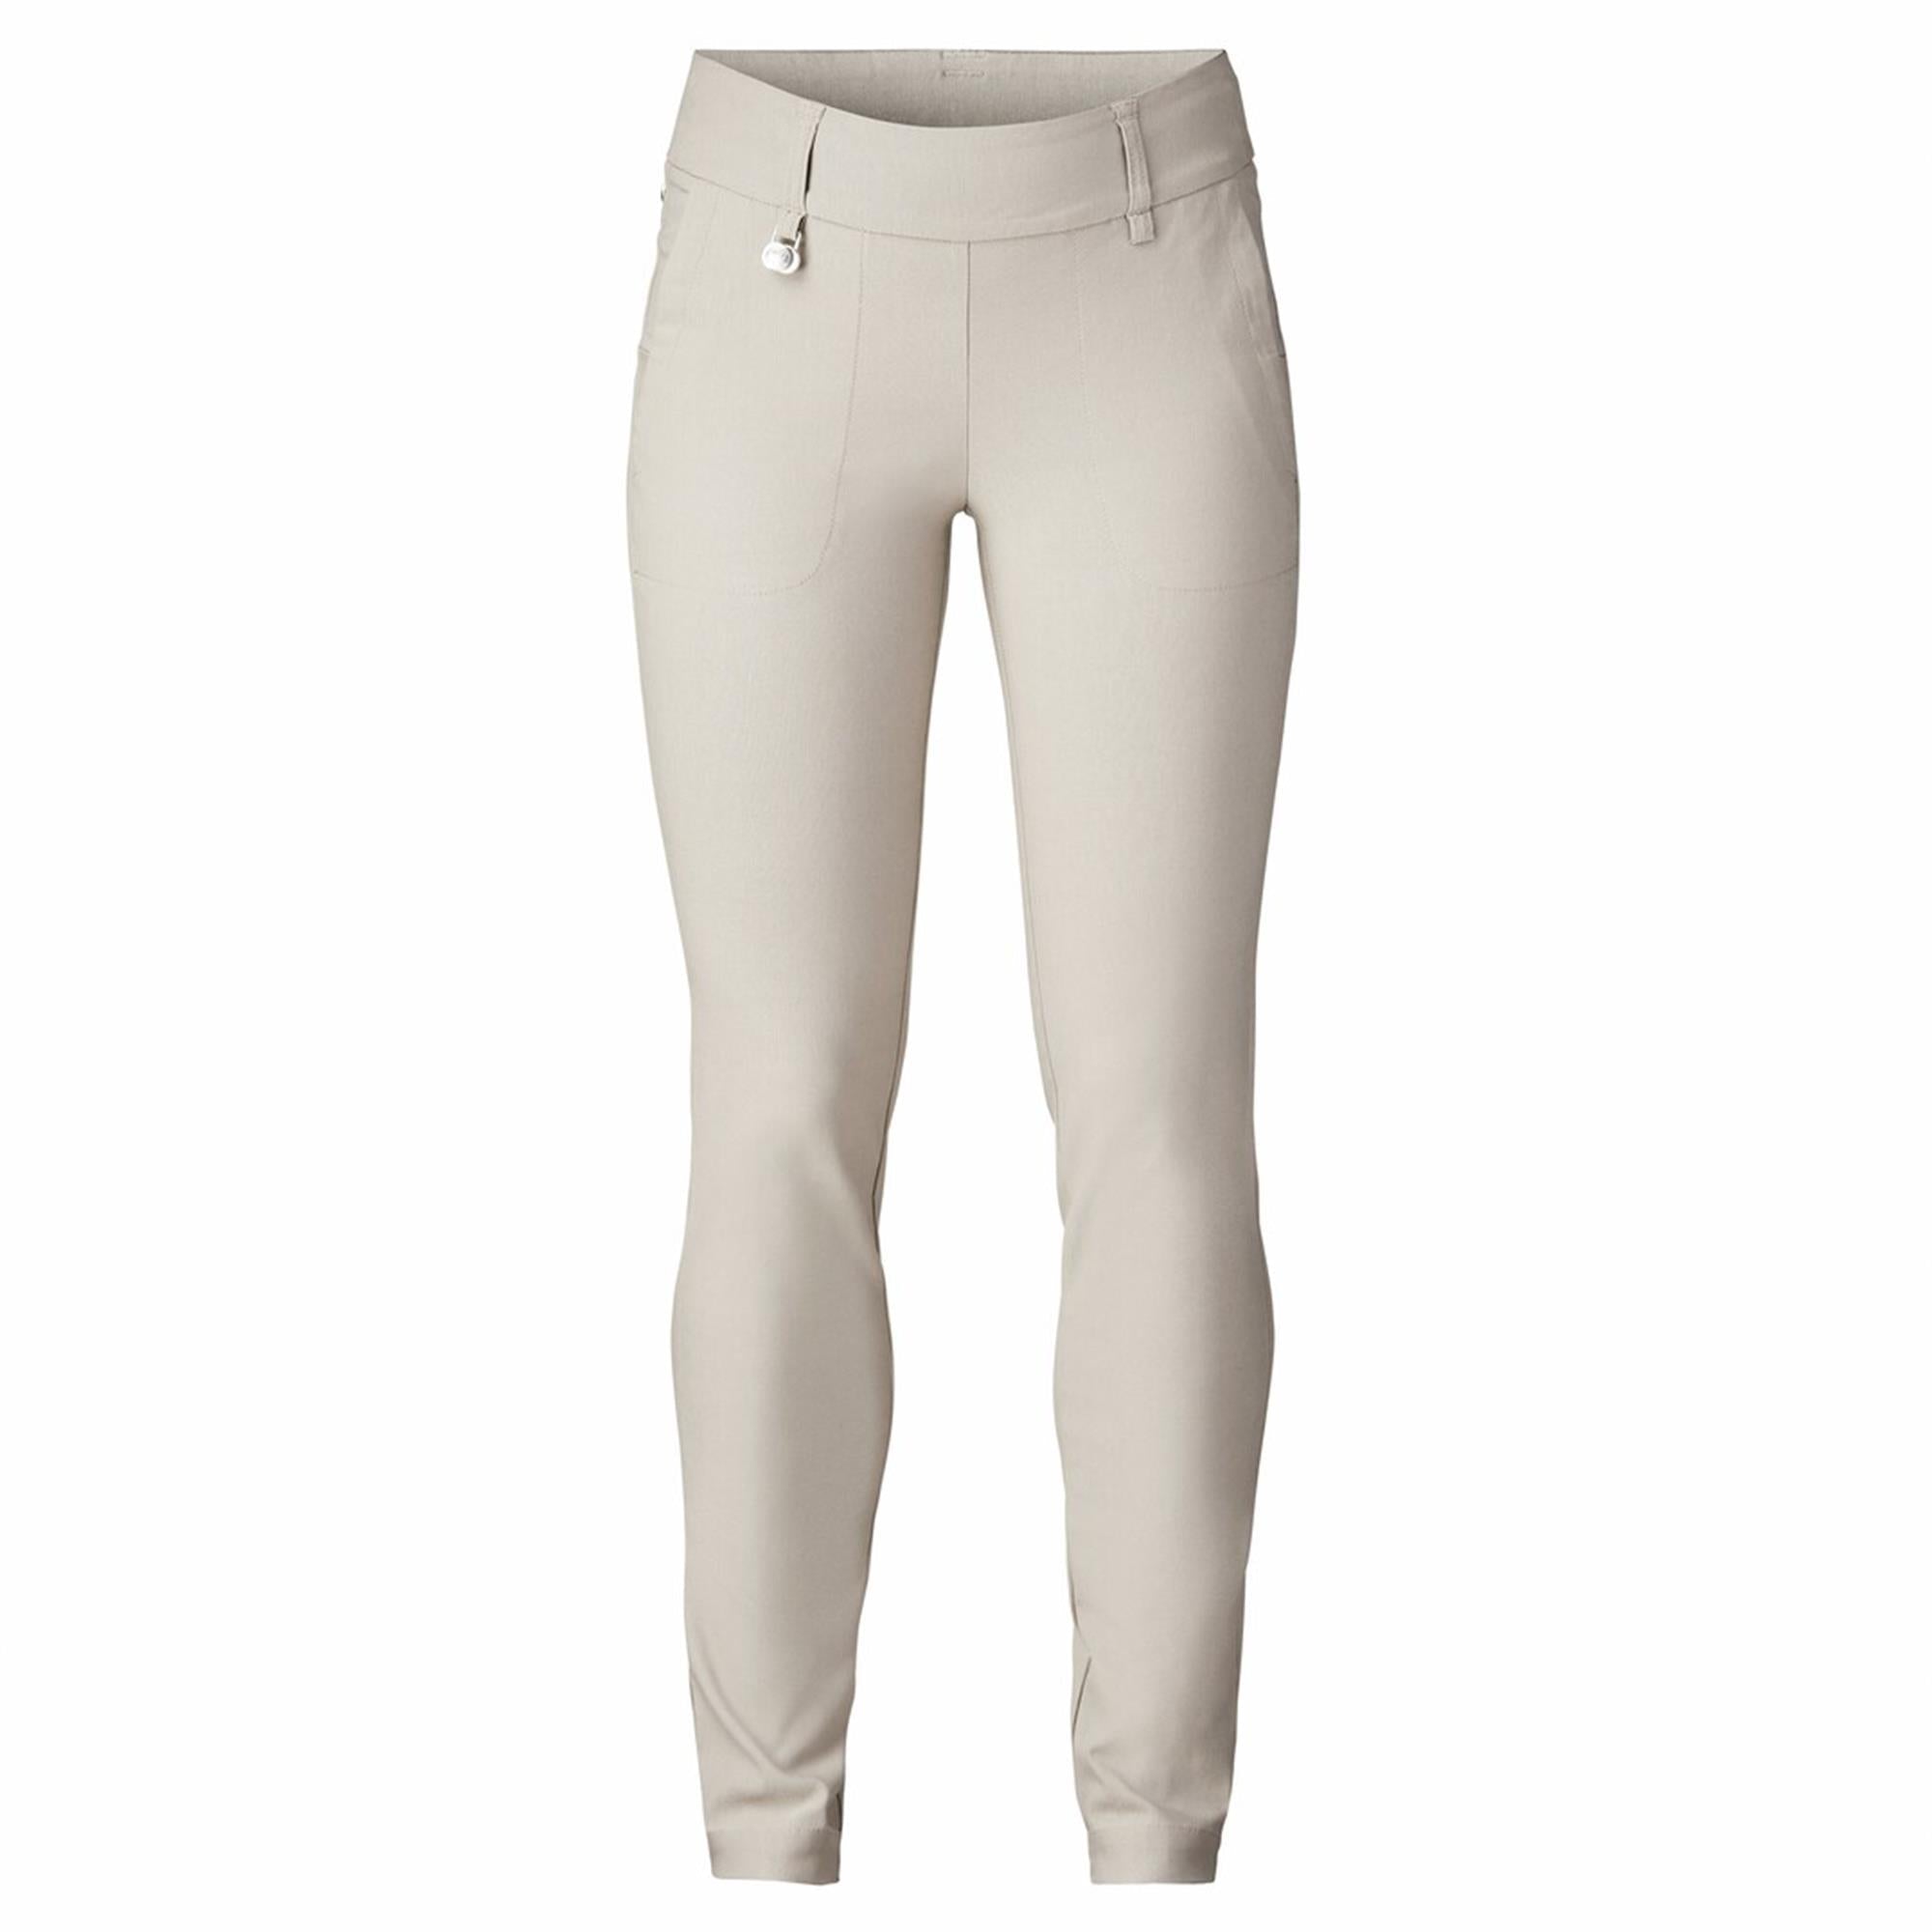 Daily Sports Magic Warm 29 Inch - Trousers